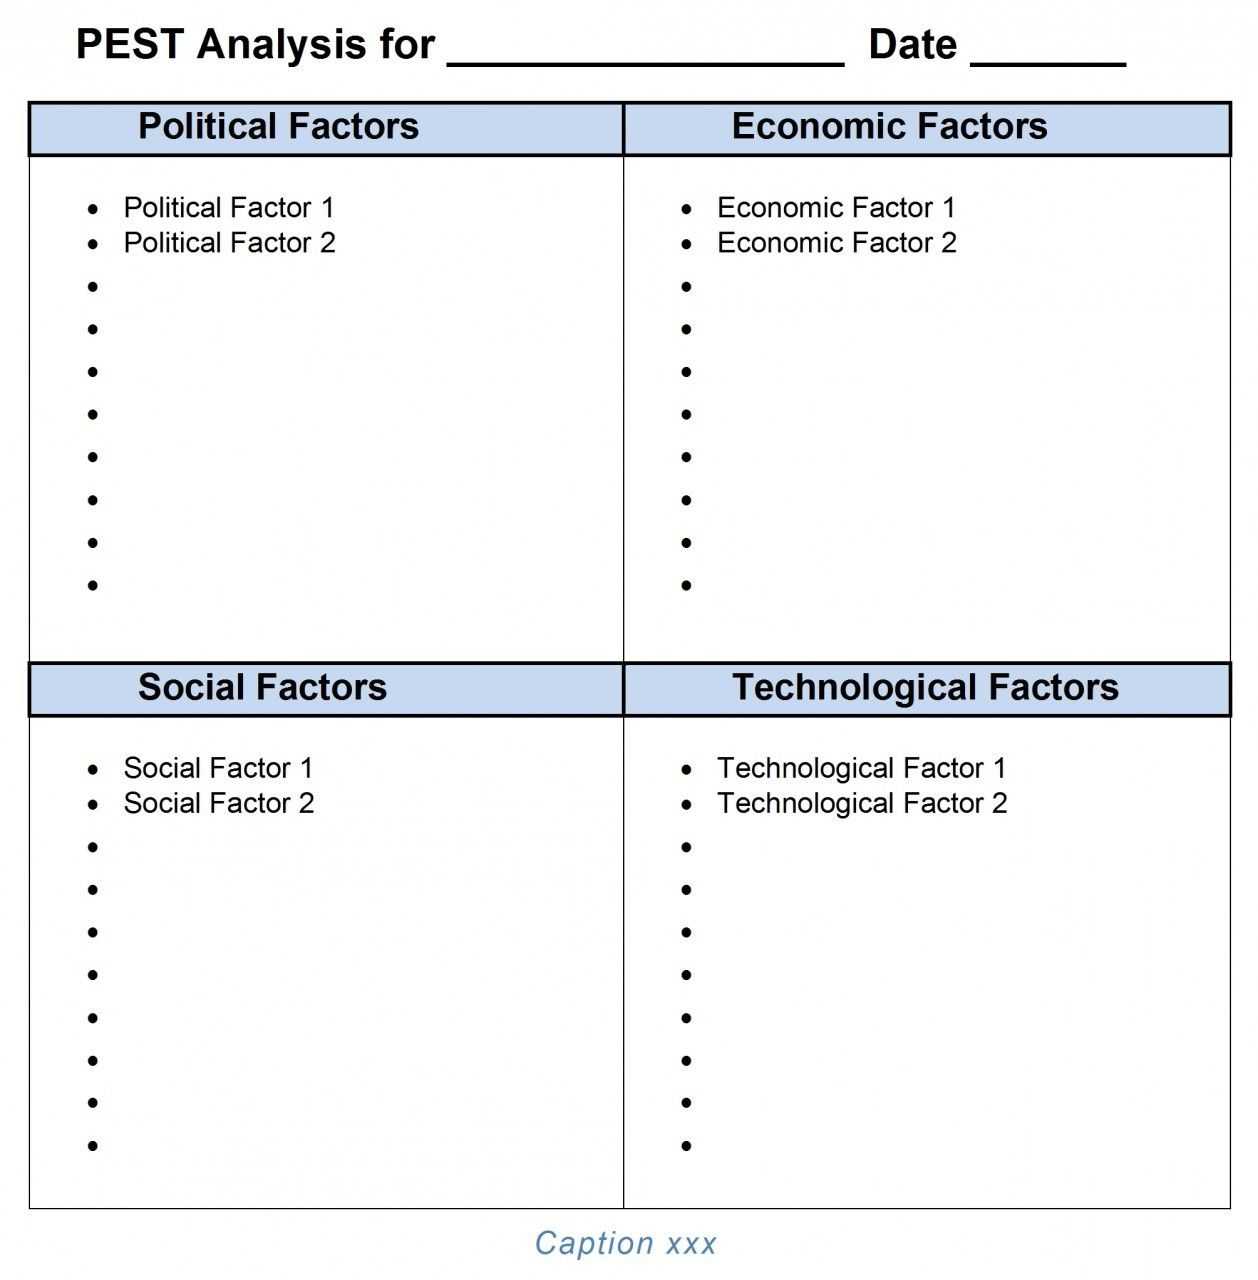 Pest Analysis Ms Word Template | It | Words, Templates Regarding Pestel Analysis Template Word